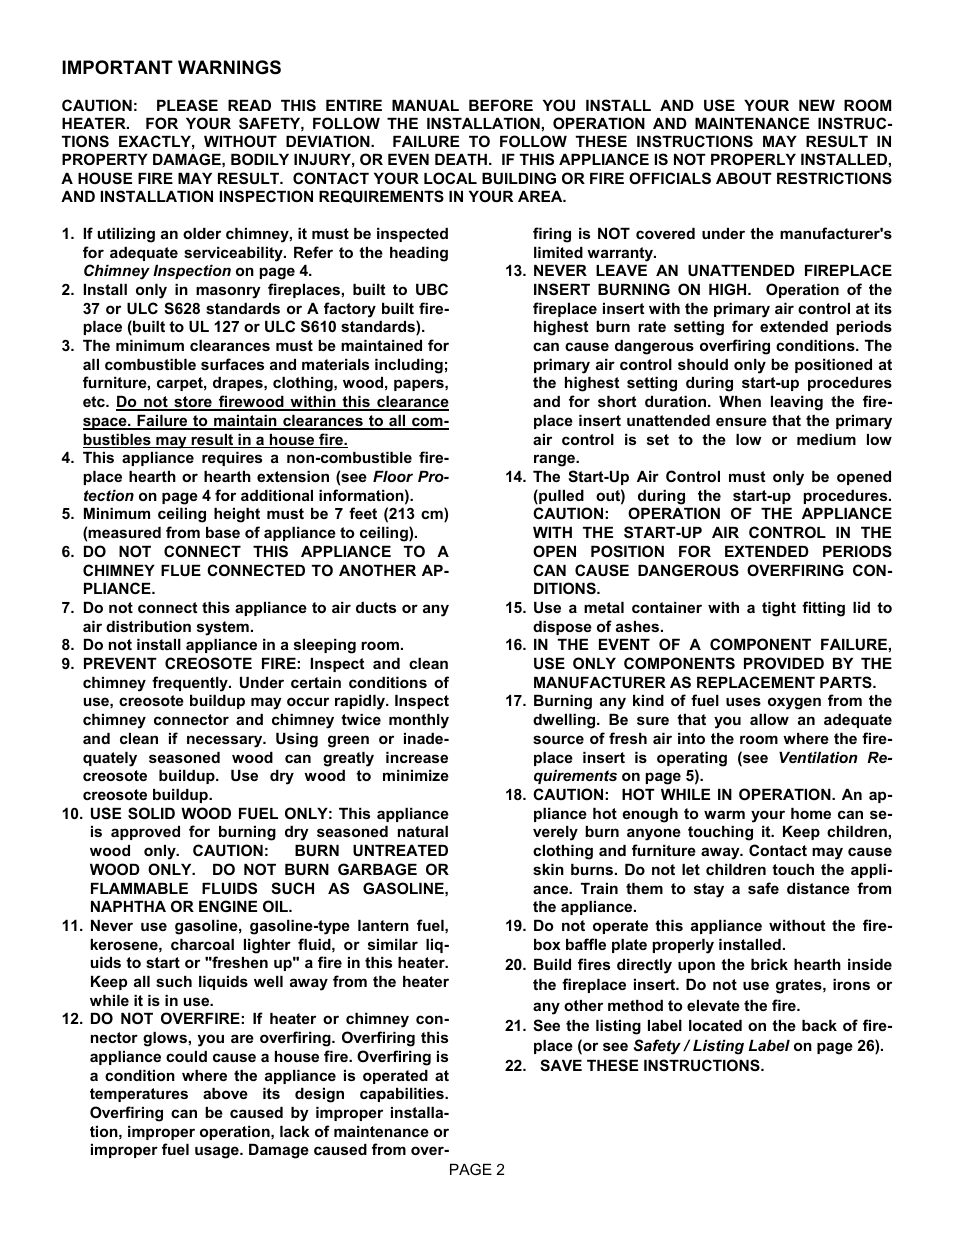 LG EARTH STOVE 2800HT User Manual | Page 2 / 29